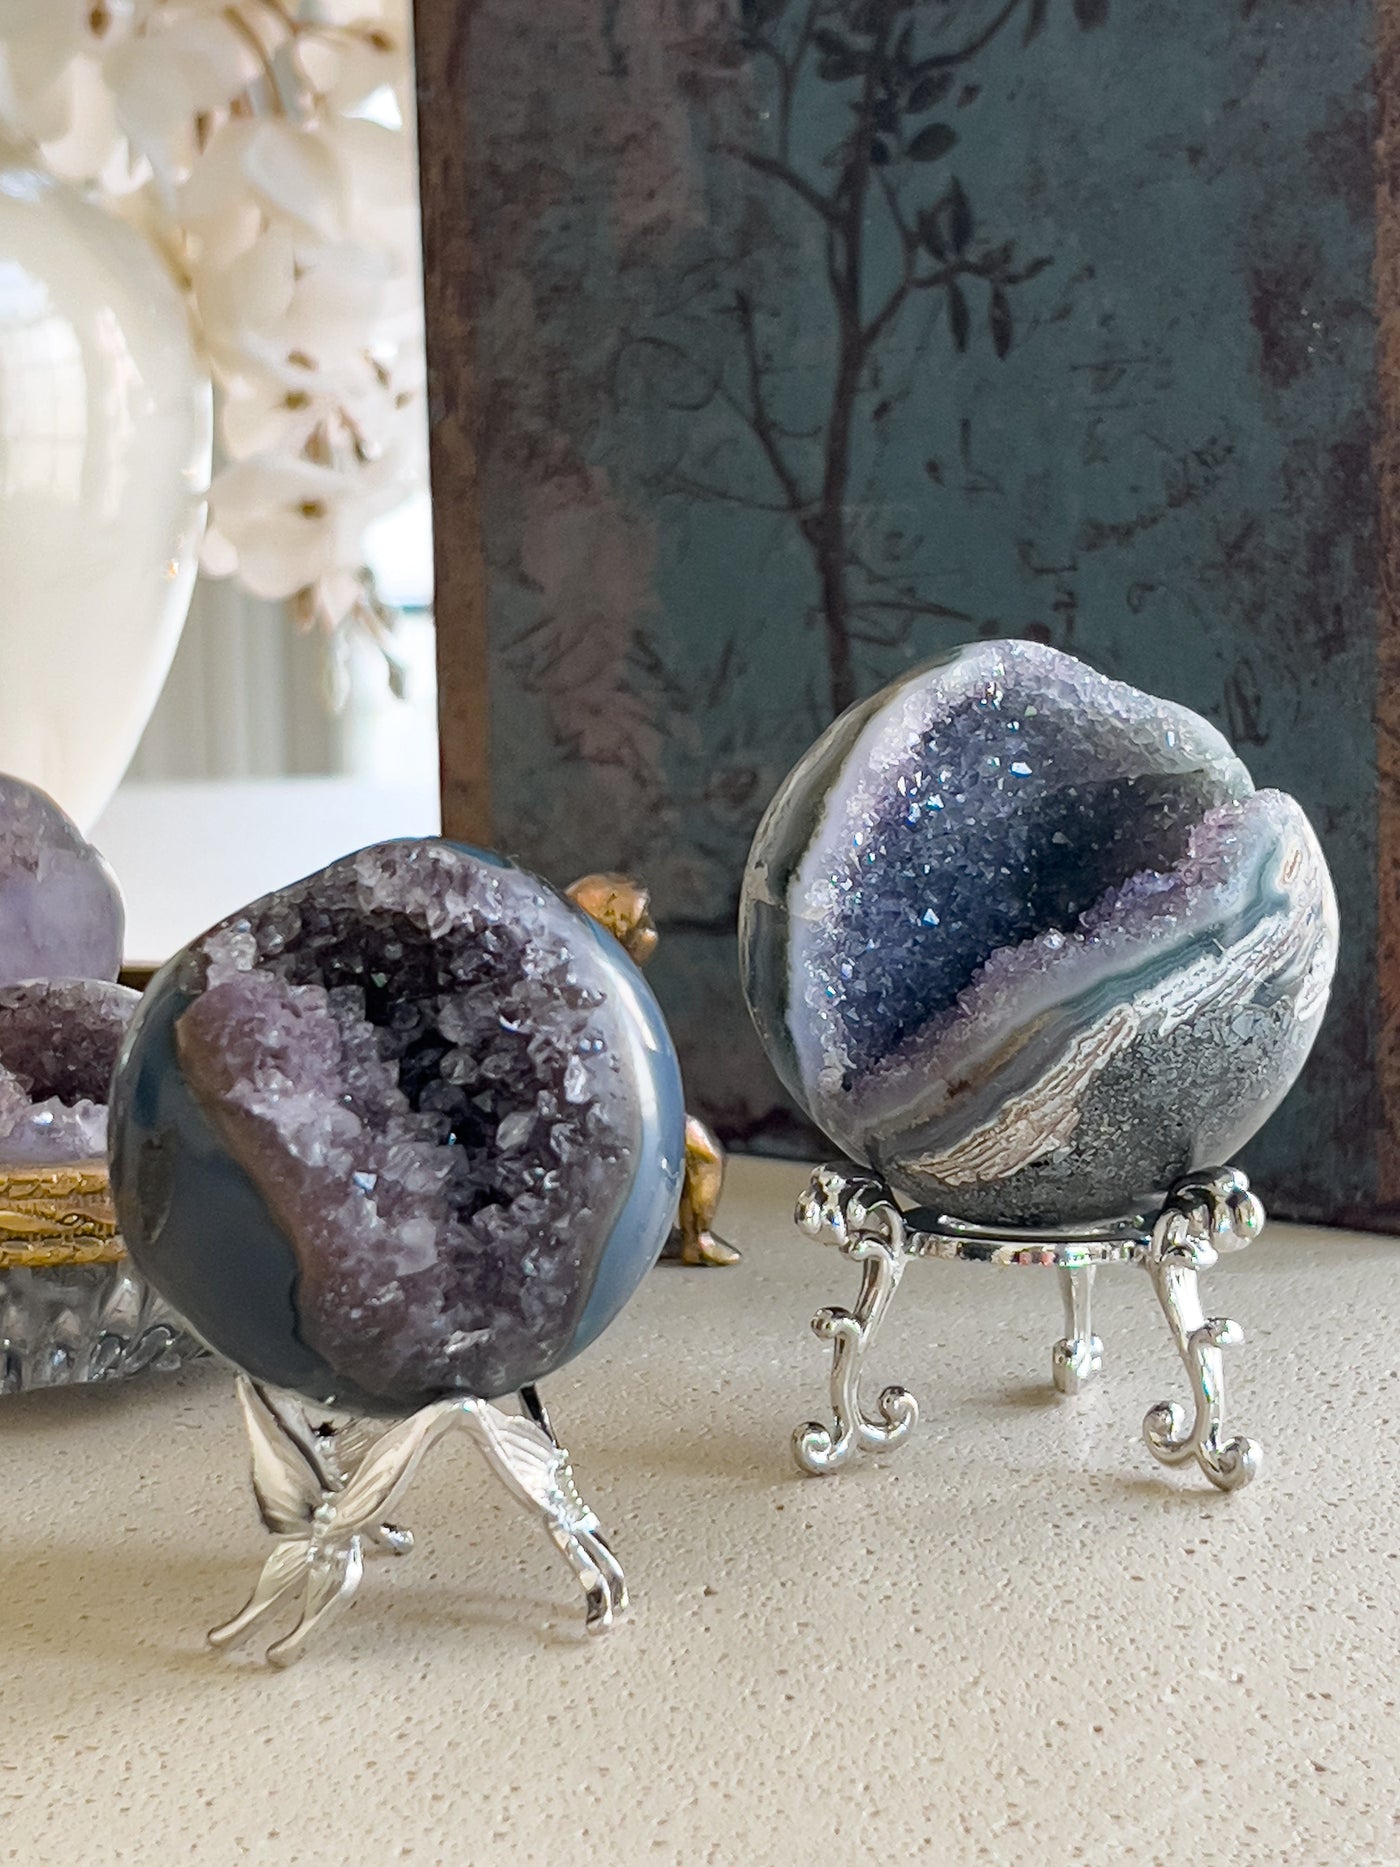 AMETHYST DRUZY GEODE SPHERES Revive In Style Vintage Furniture Painted Refinished Redesign Beautiful One of a Kind Artistic Antique Unique Home Decor Interior Design French Country Shabby Chic Cottage Farmhouse Grandmillenial Coastal Chalk Paint Metallic Glam Eclectic Quality Dovetailed Rustic Furniture Painter Pinterest Bedroom Living Room Entryway Kitchen Home Trends House Styles Decorating ideas